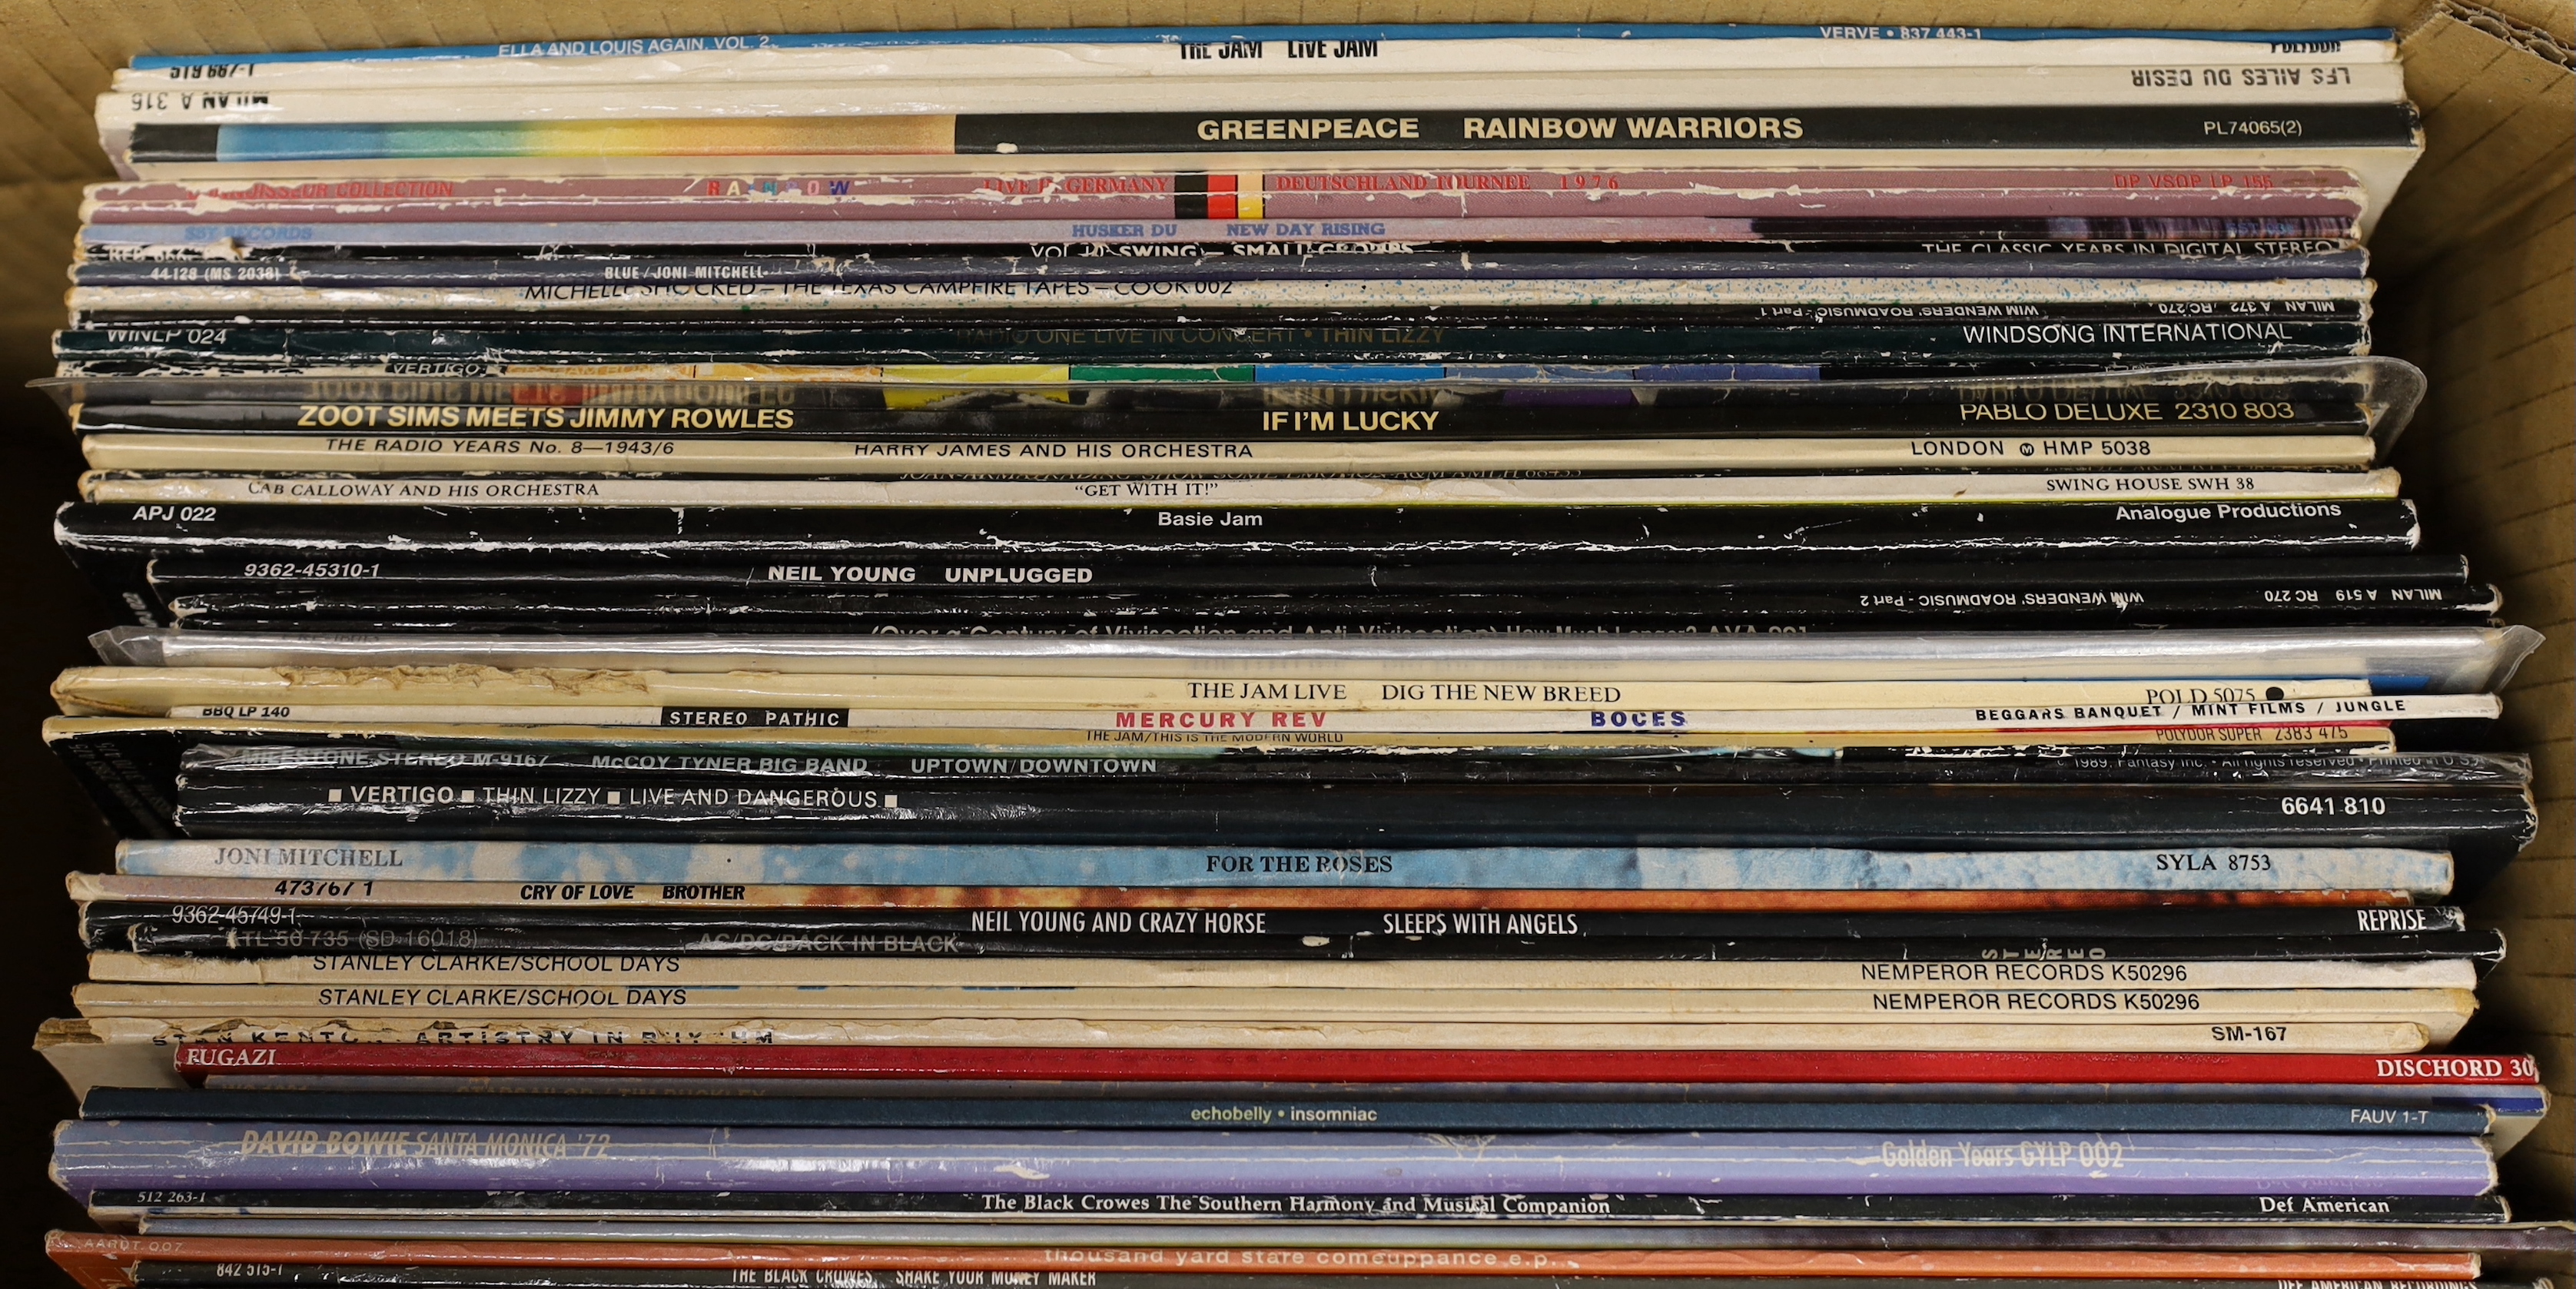 Fifty-five mainly 80's and 90's LPs, including, The Jam, Joan Armatrading, Neil Young, Mercury Rev, Thin Lizzy, Joni Mitchell, AC/DC, David Bowie, The Carpenters, Alice In Chains, etc